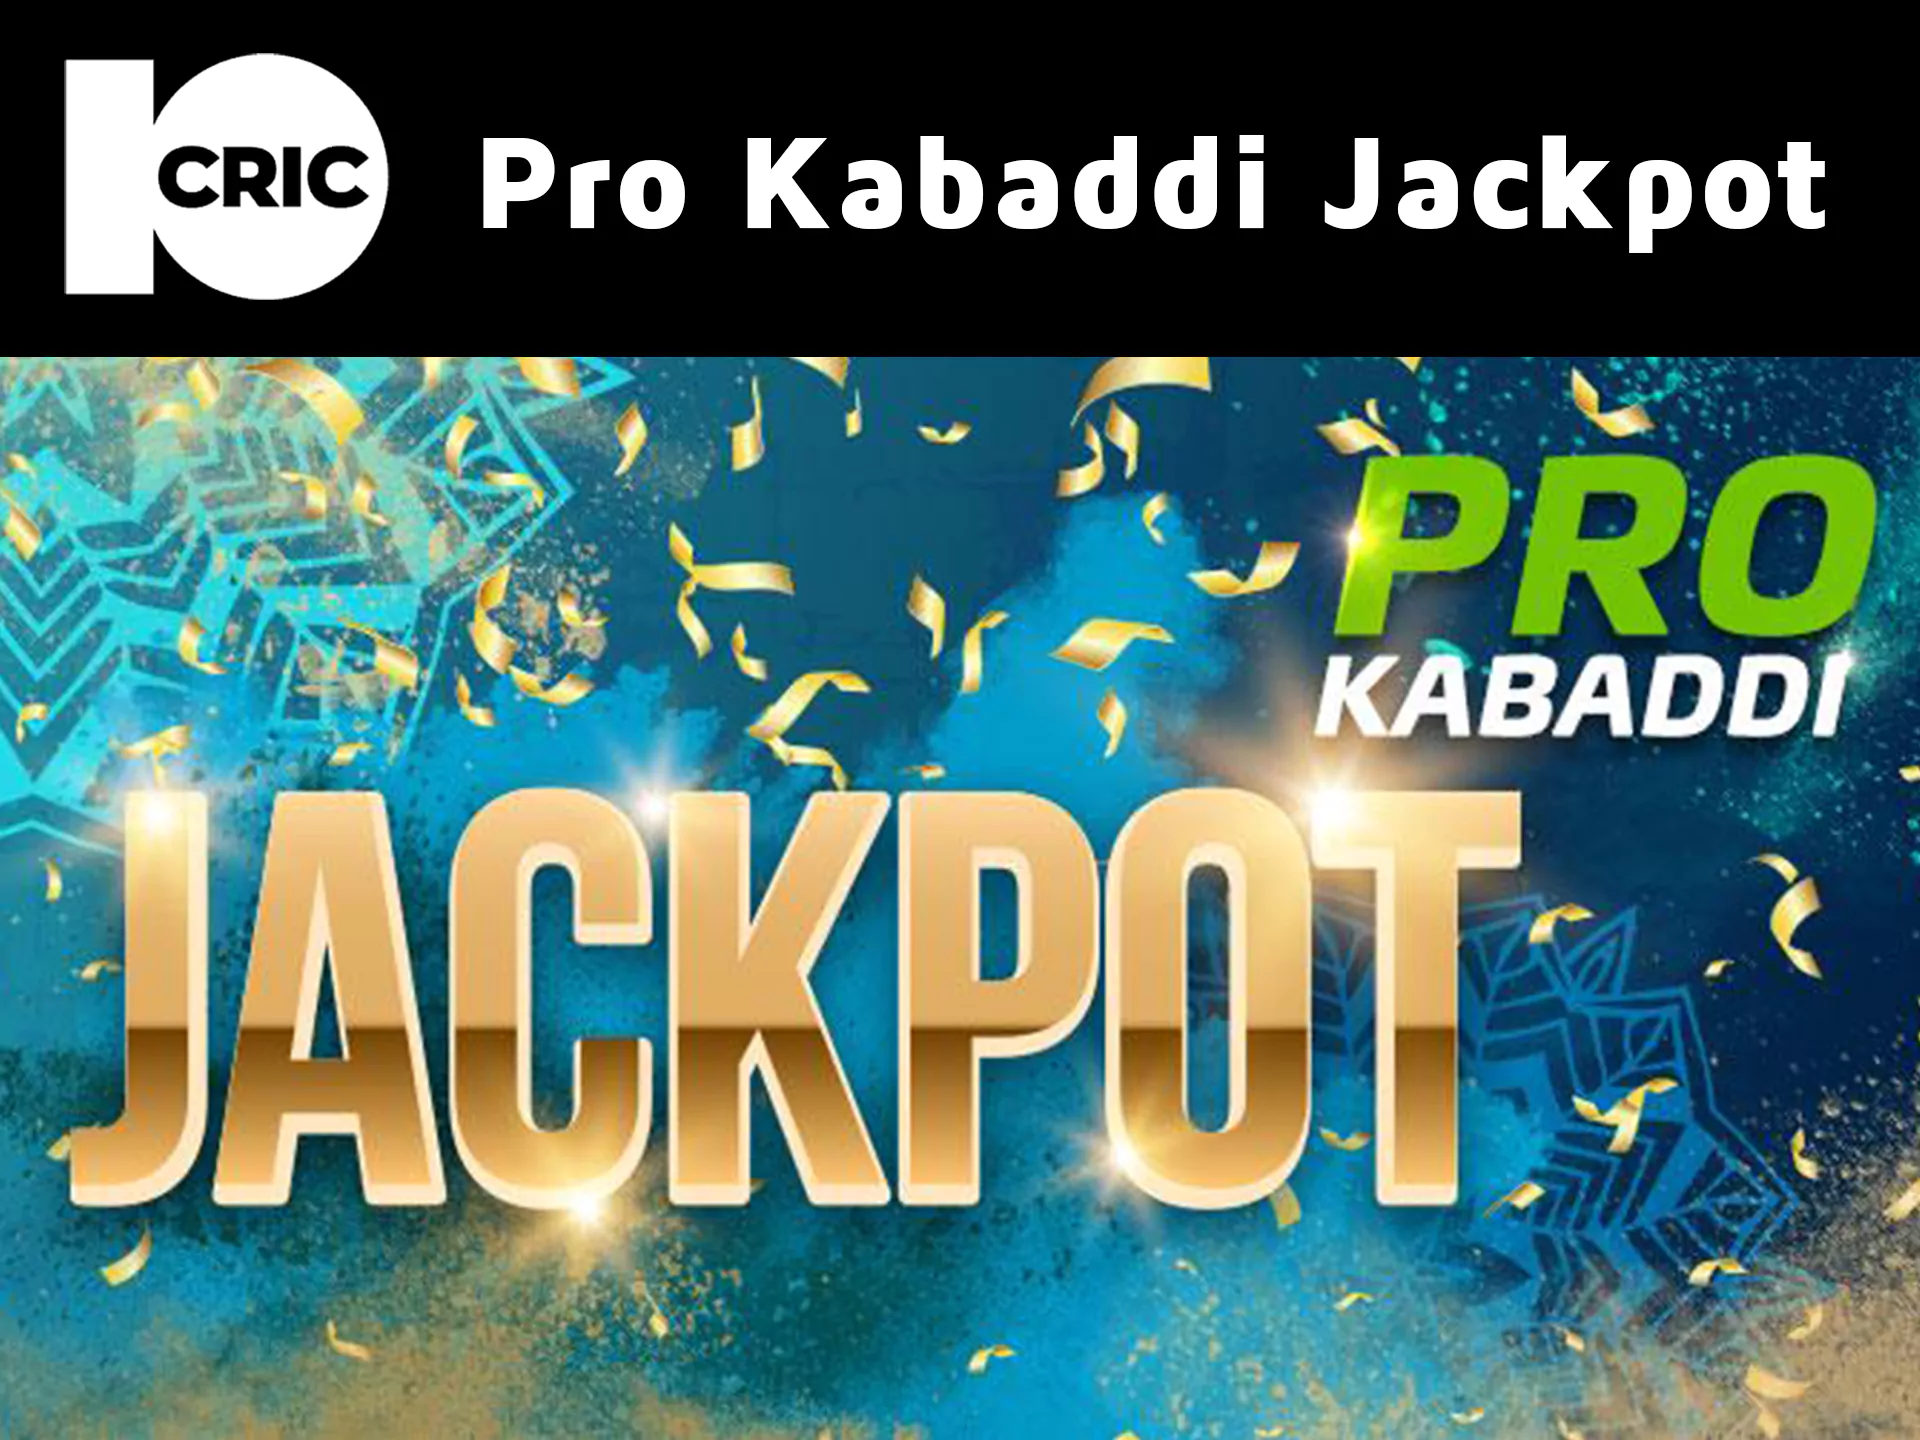 Get jackpot simply by doing your bets.